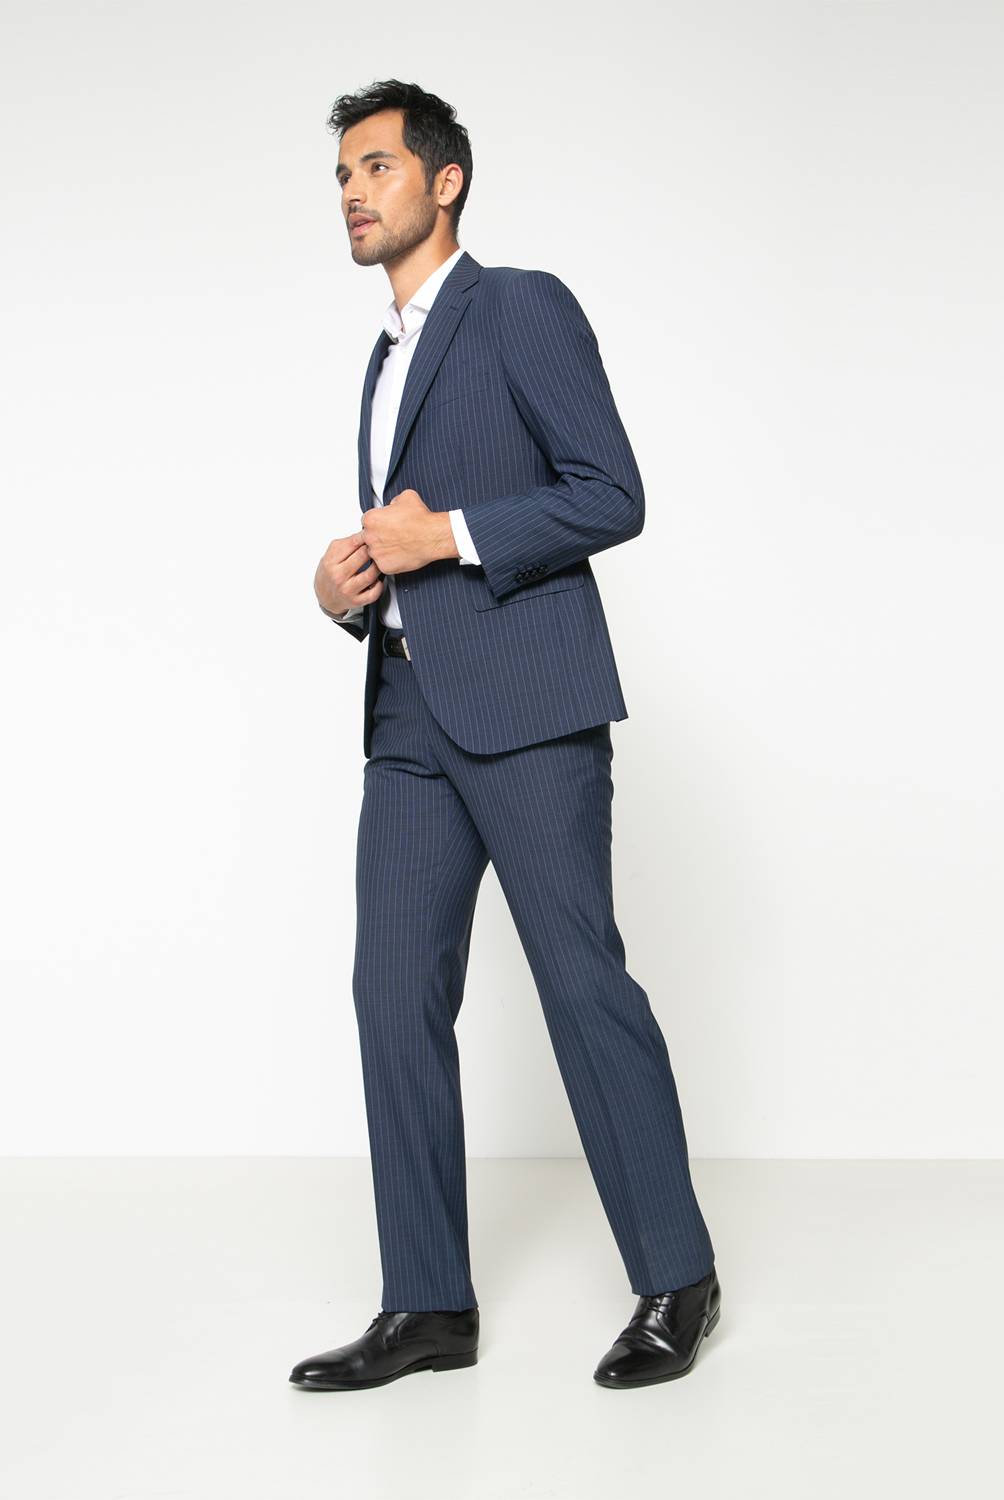 TRIAL - Traje Straight Fit Hombre